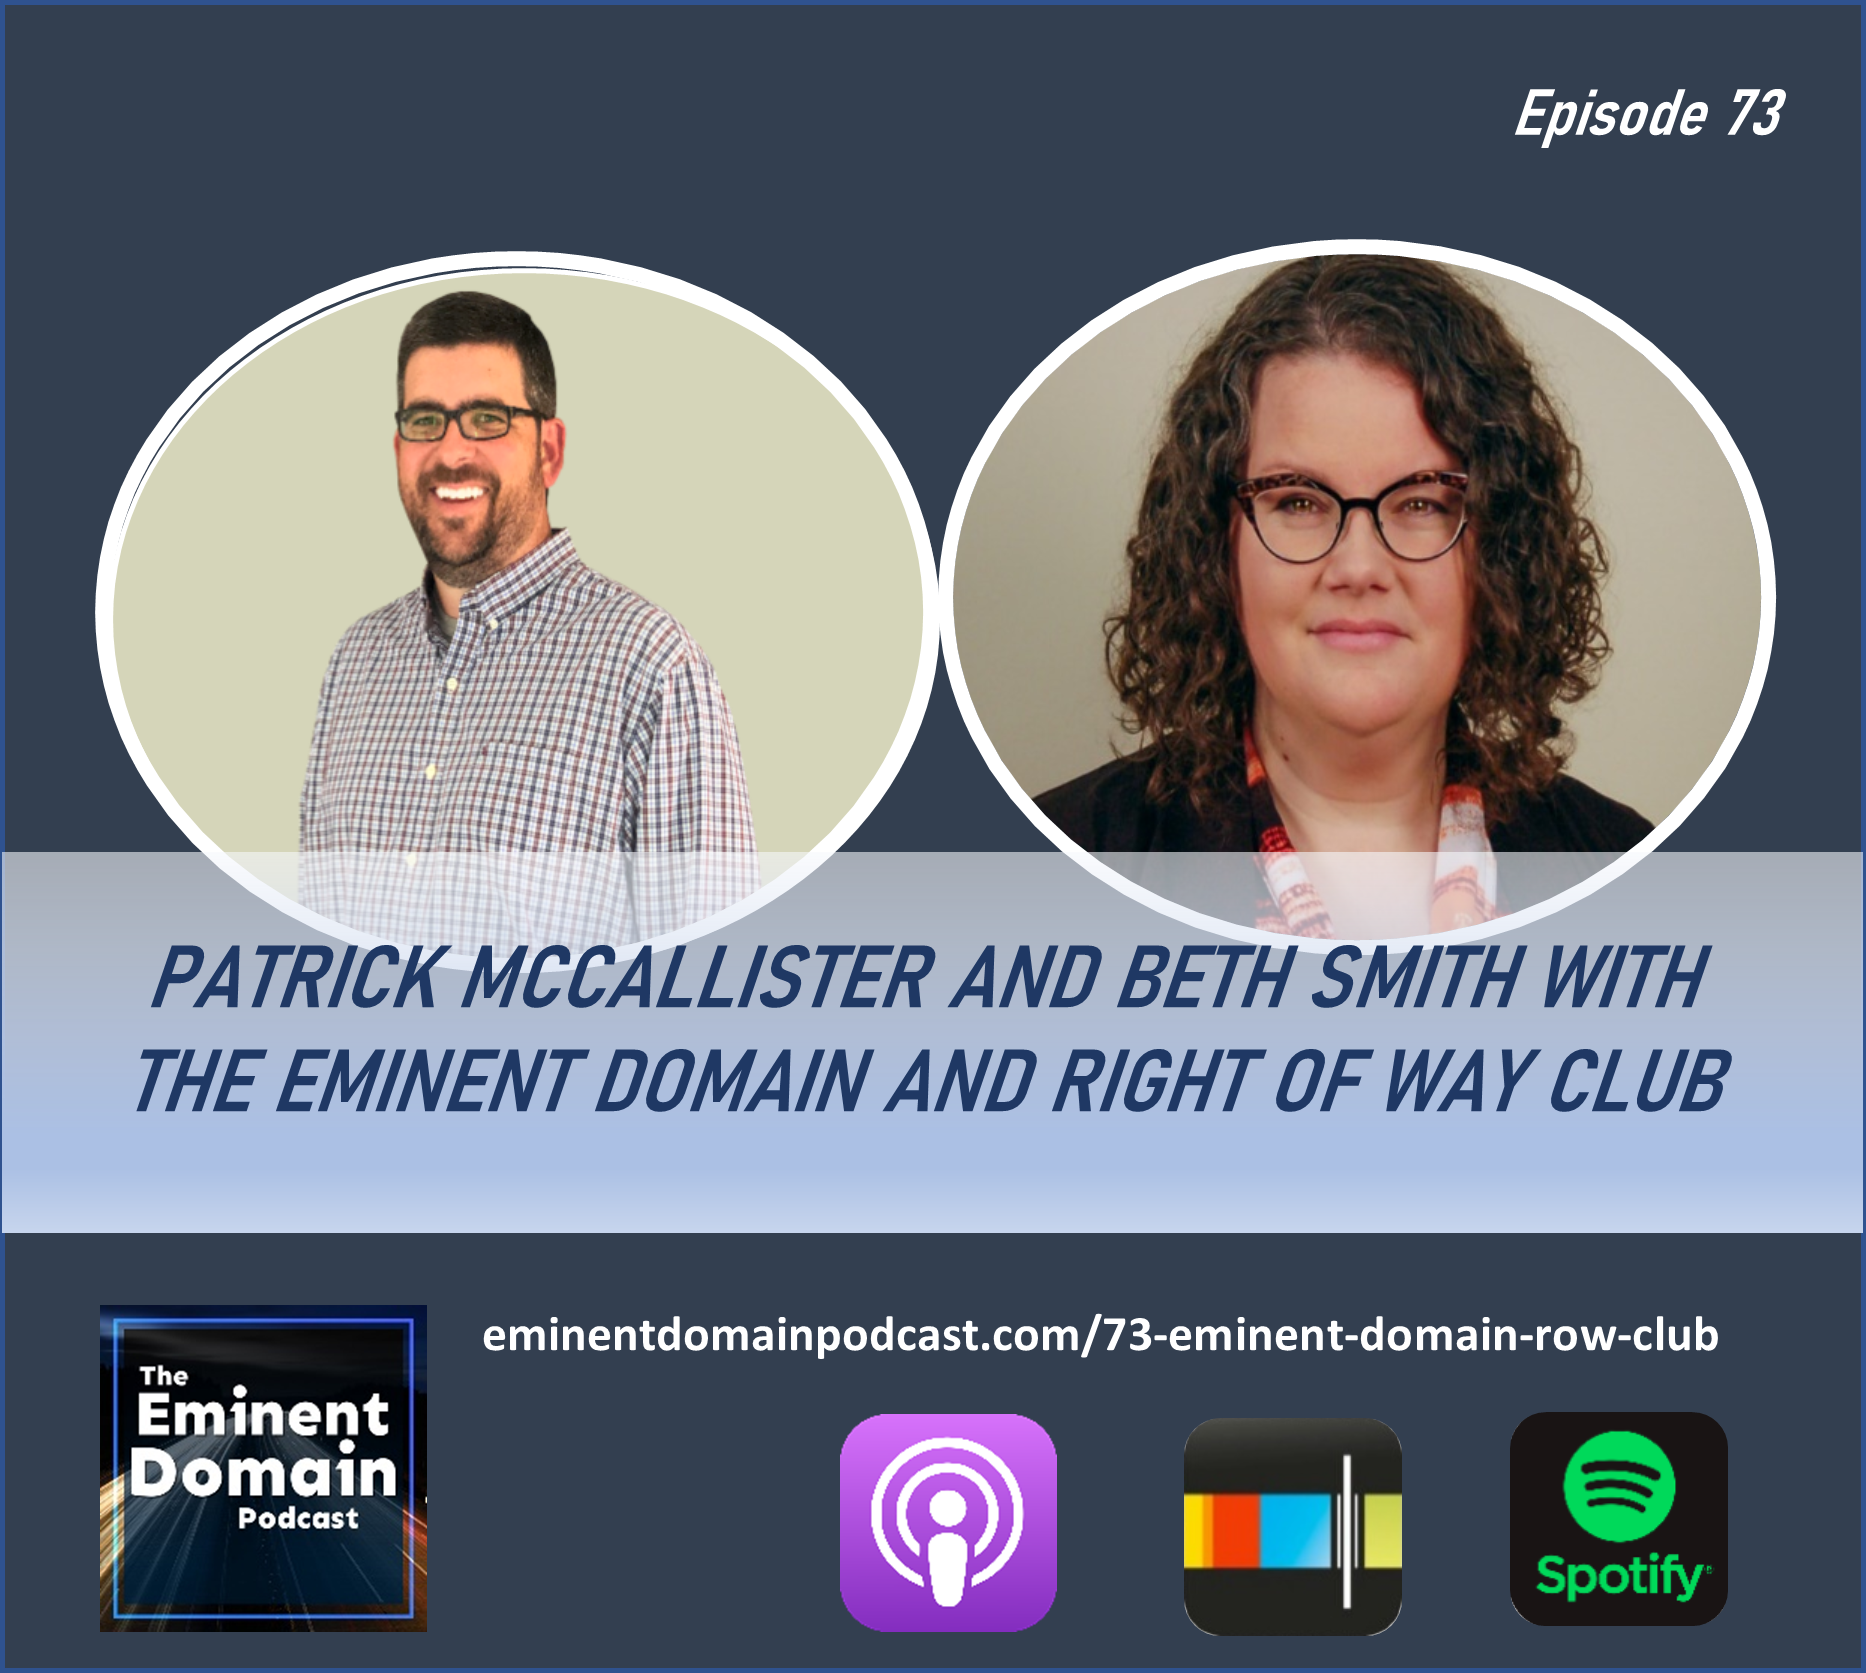 eminent domain right of way club founders